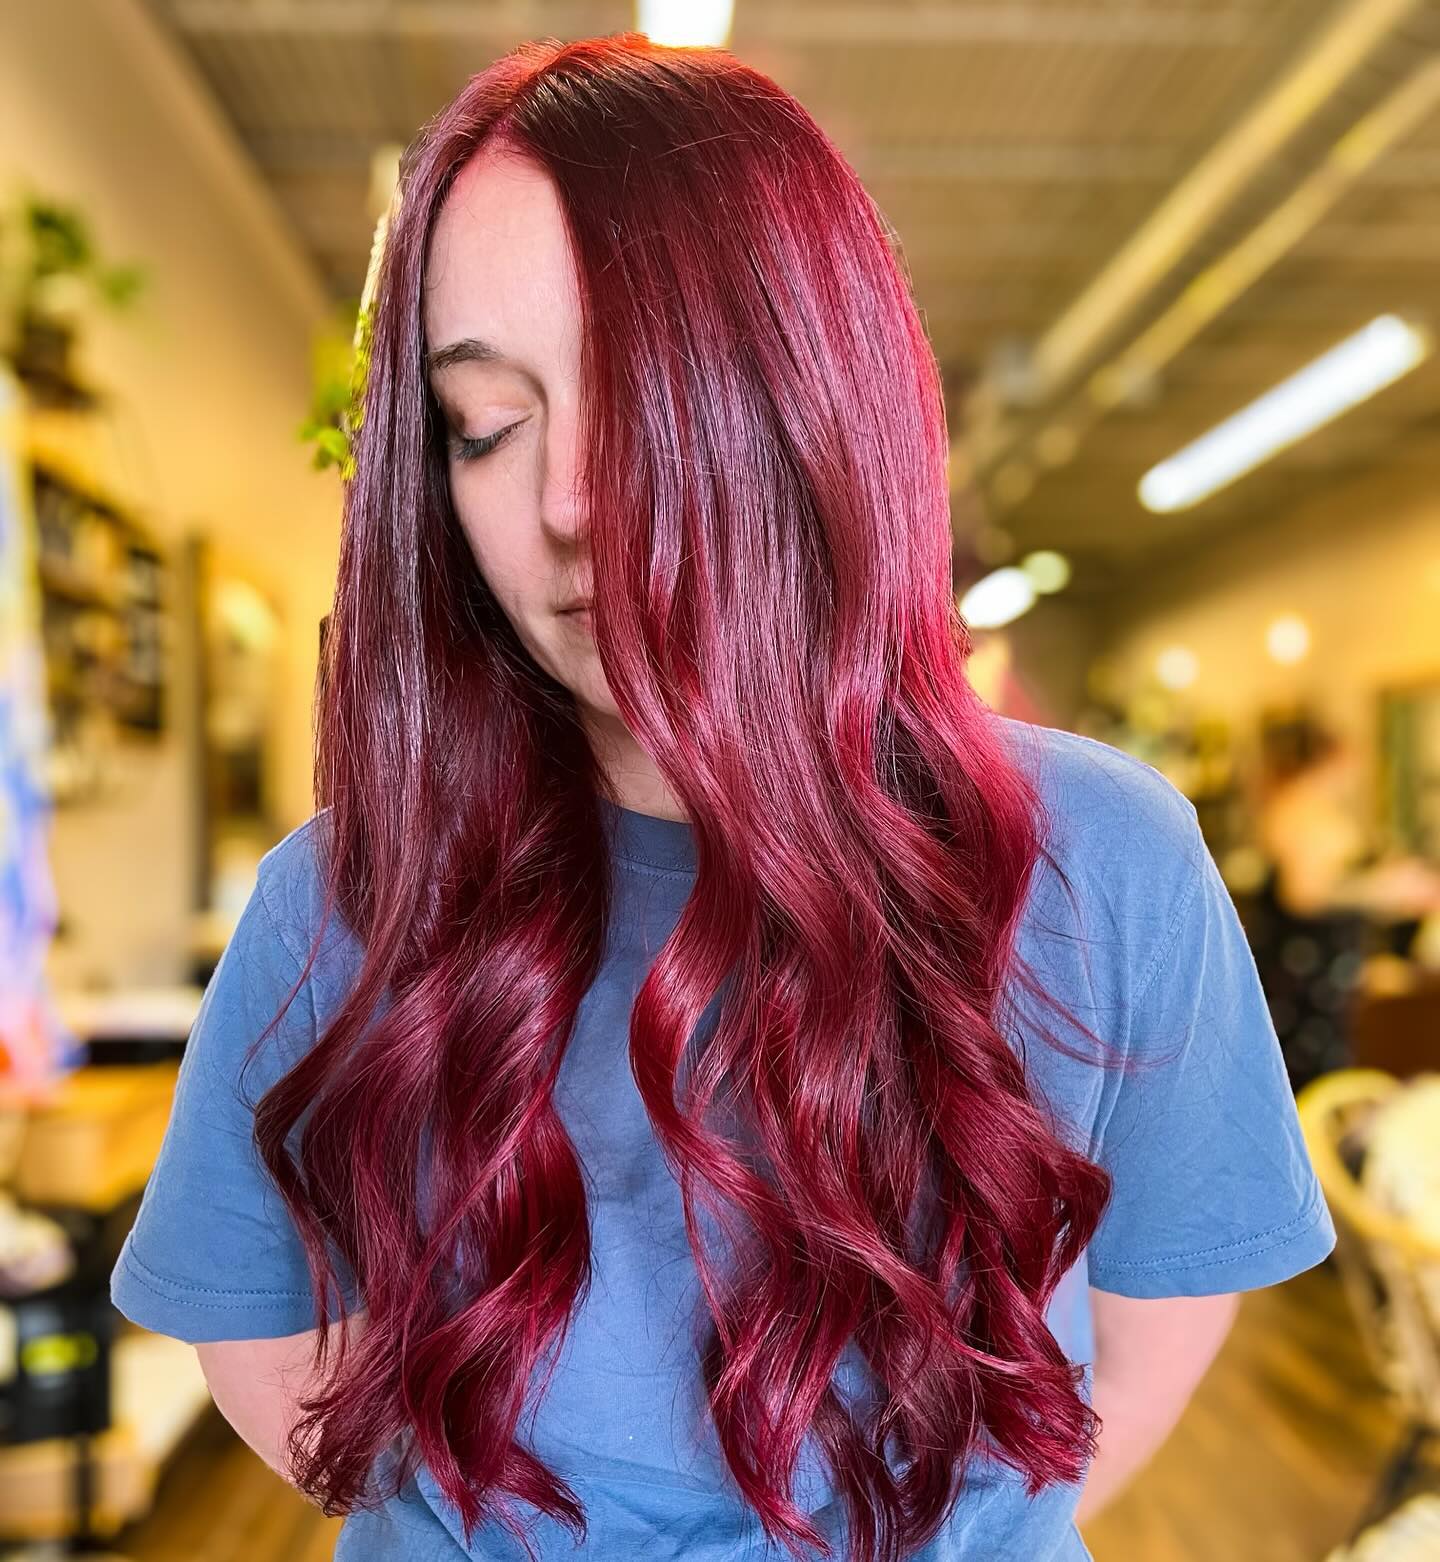 Light Up The City: Bright Red Ariel Hair Inspo